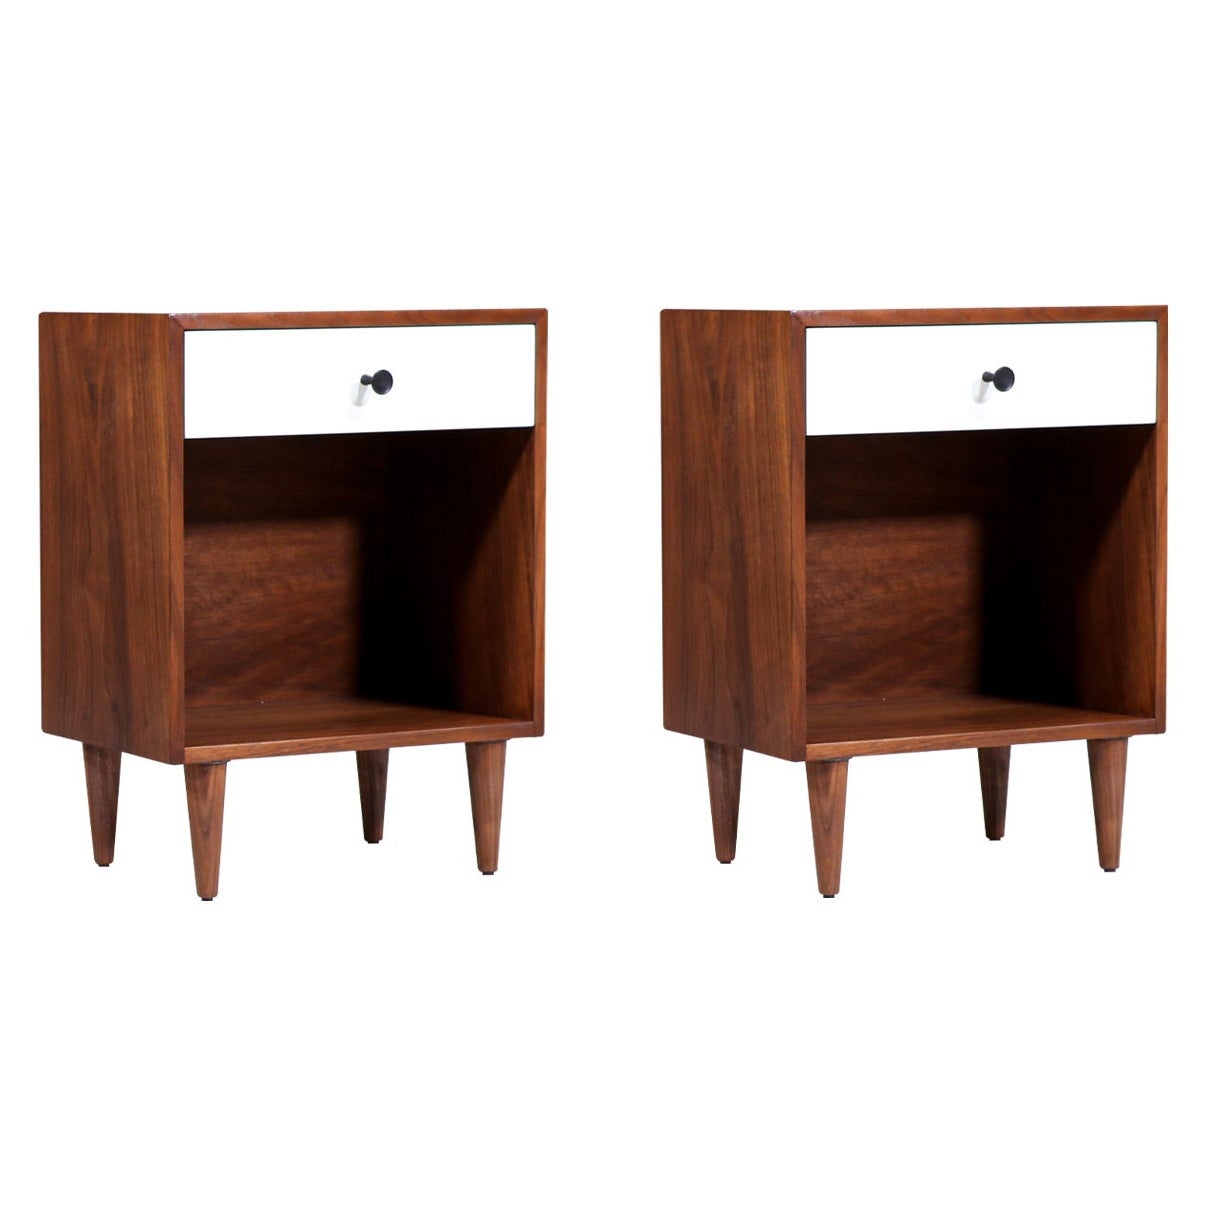 Milo Baughman Two-Tone Lacquered Night Stands for Glenn of California